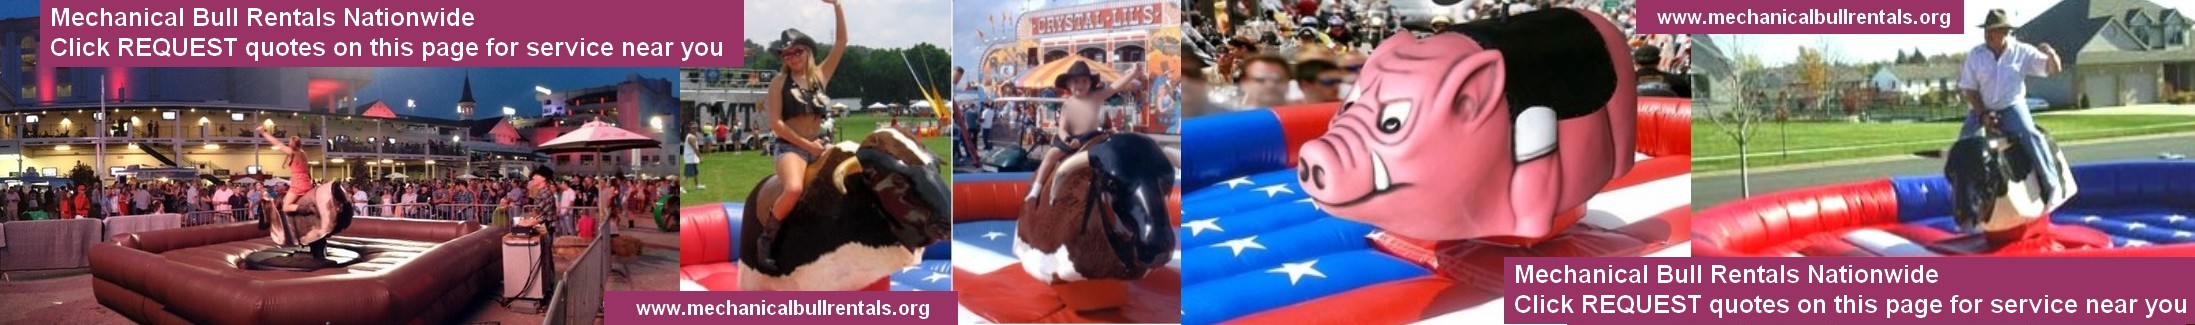 Mechanical Bull Rentals Beckley West Virginia WV and near you. Free referrals to local mechanical bull companies LOGO